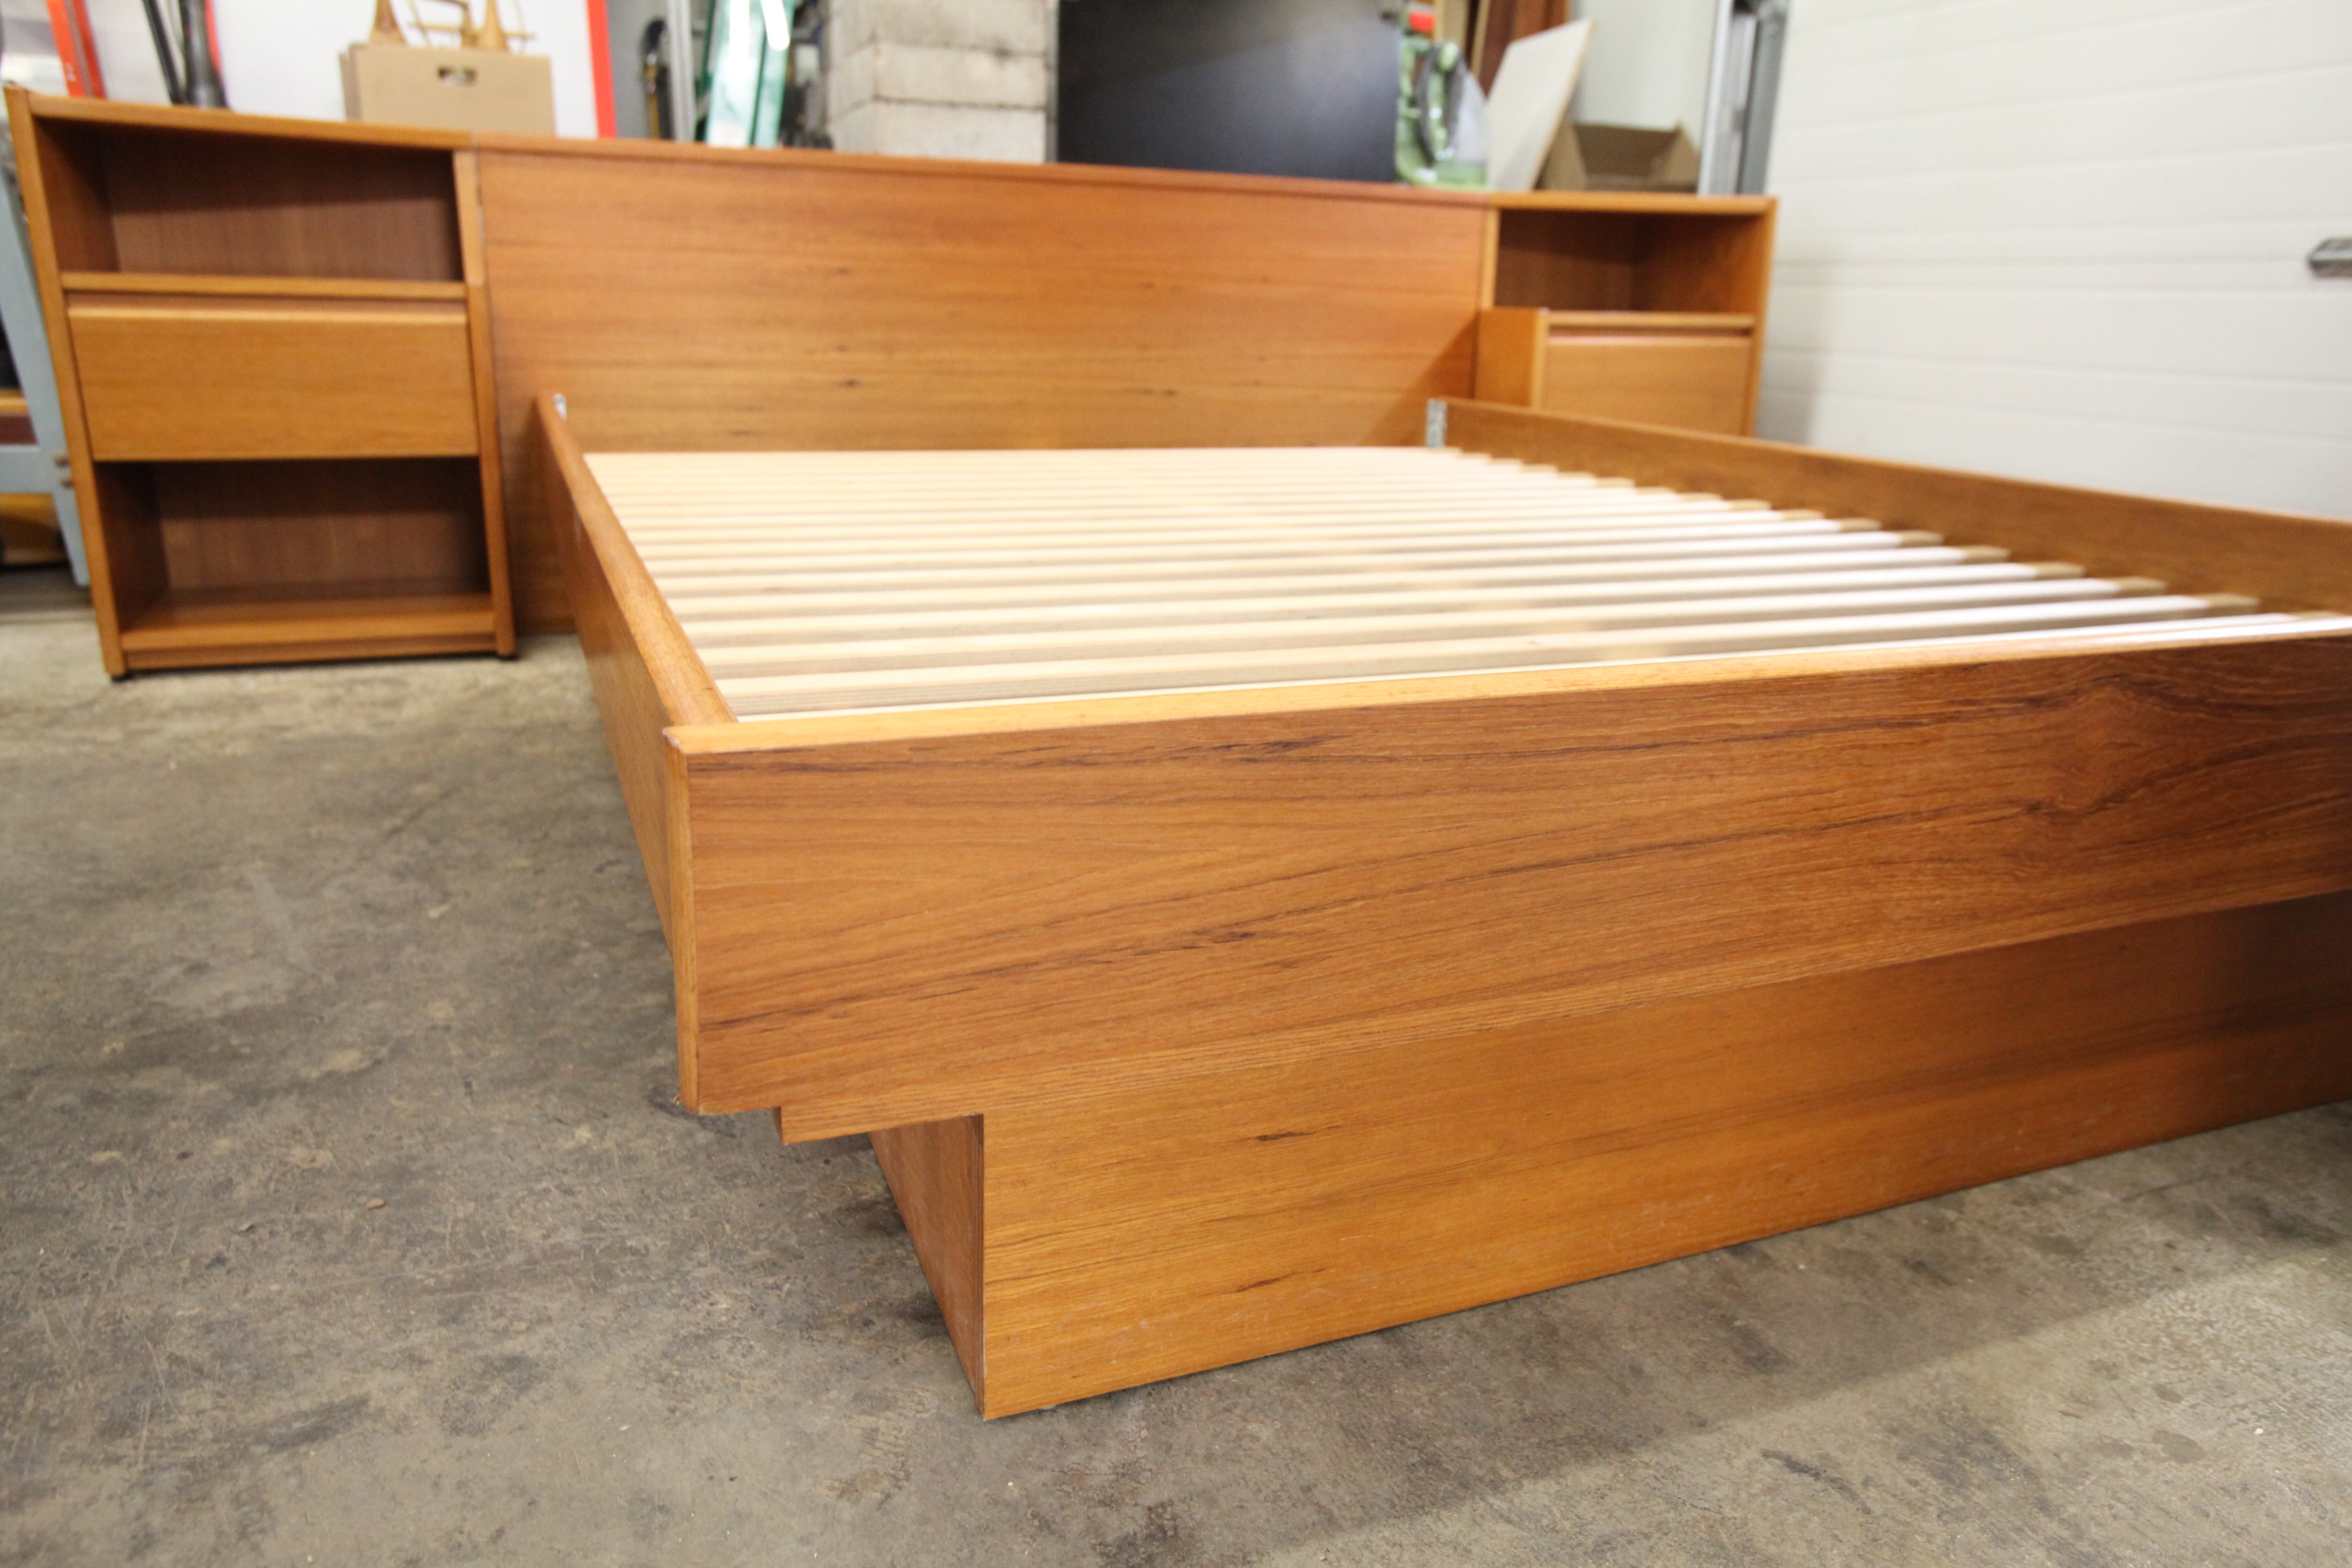 Vintage Teak Queen Size Bed with Night Stands (106.25"W x 29"H x 90"D)